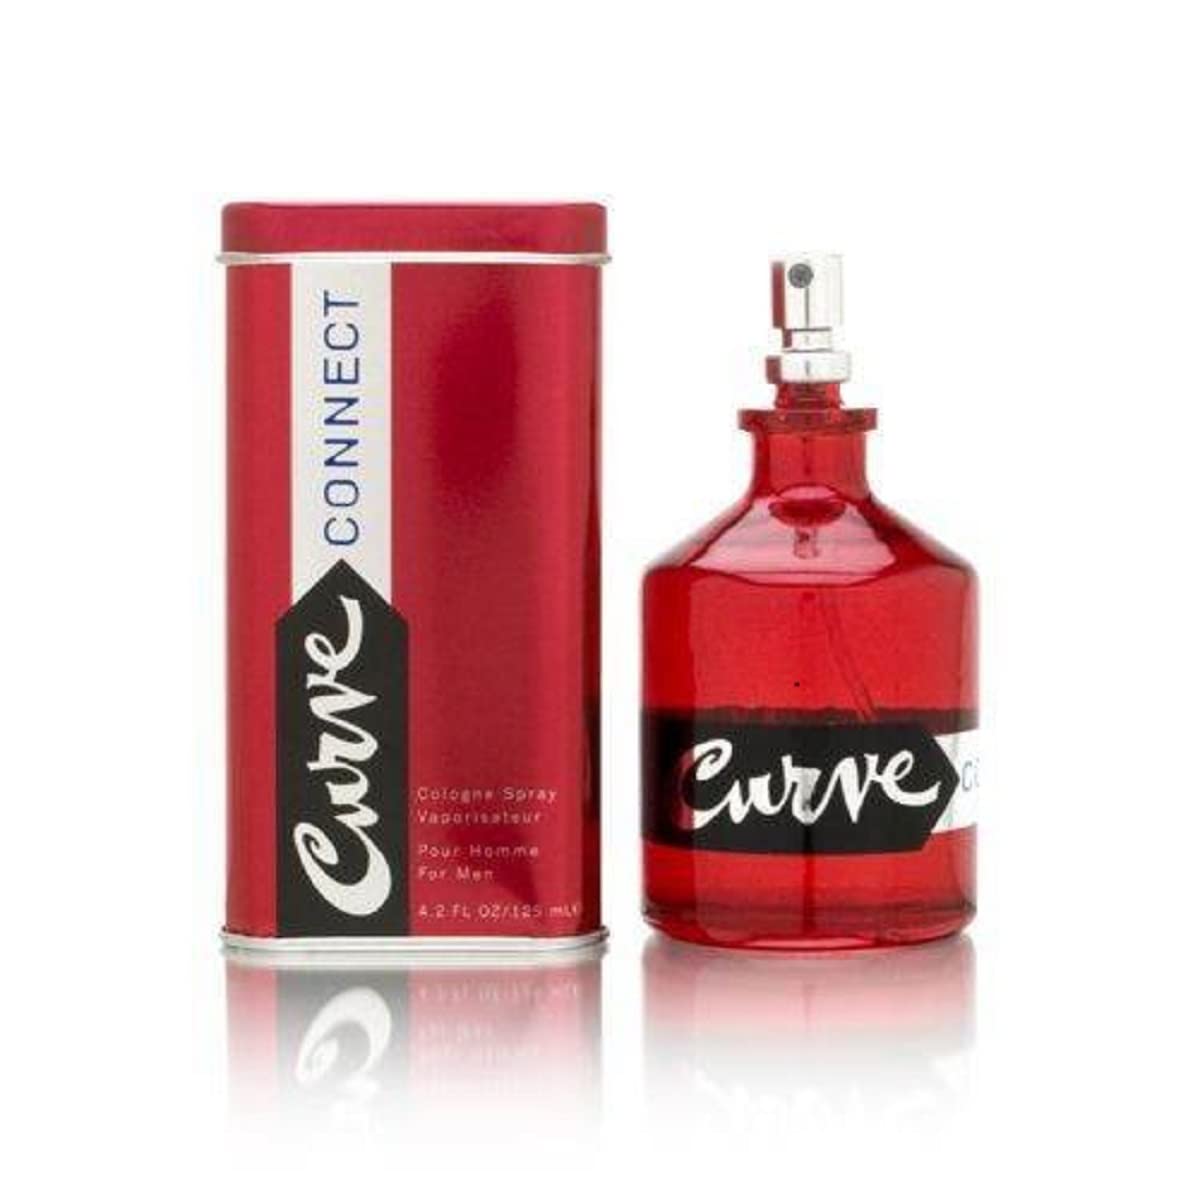 Curve Men's Cologne Fragrance Set, Deodorant, Aftershave Balm & Cologne, Spicy Wood Magnetic Scent, 3 Piece Set & Men's Cologne Fragrance Spray, Casual Day or Night Scent, Connect, 4.2 Fl Oz